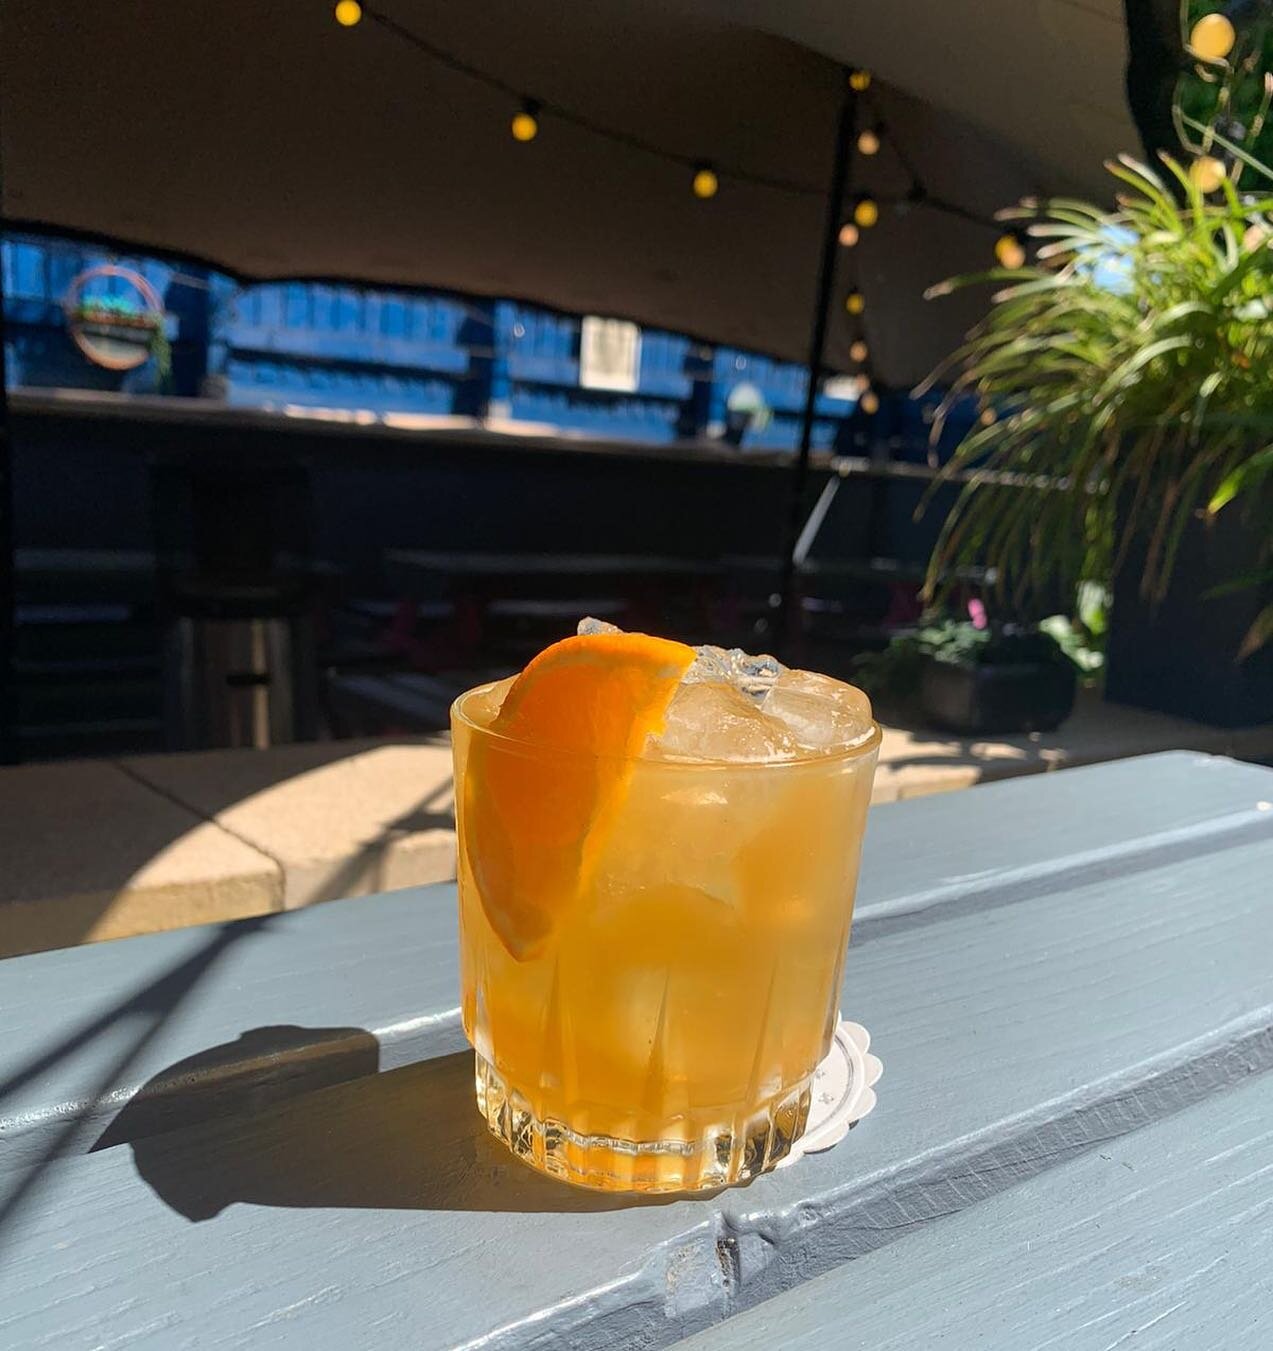 Get into the Pirate weekend spirit me hearties! Come along and try our Pirate Punch and listen to some sea shanty&rsquo;s from 5:30pm with @jessie_e_robbins in the Garden of Dreams

Woods old navy Rum, triple sec, Orange, Lime and ginger 

#plymouthp